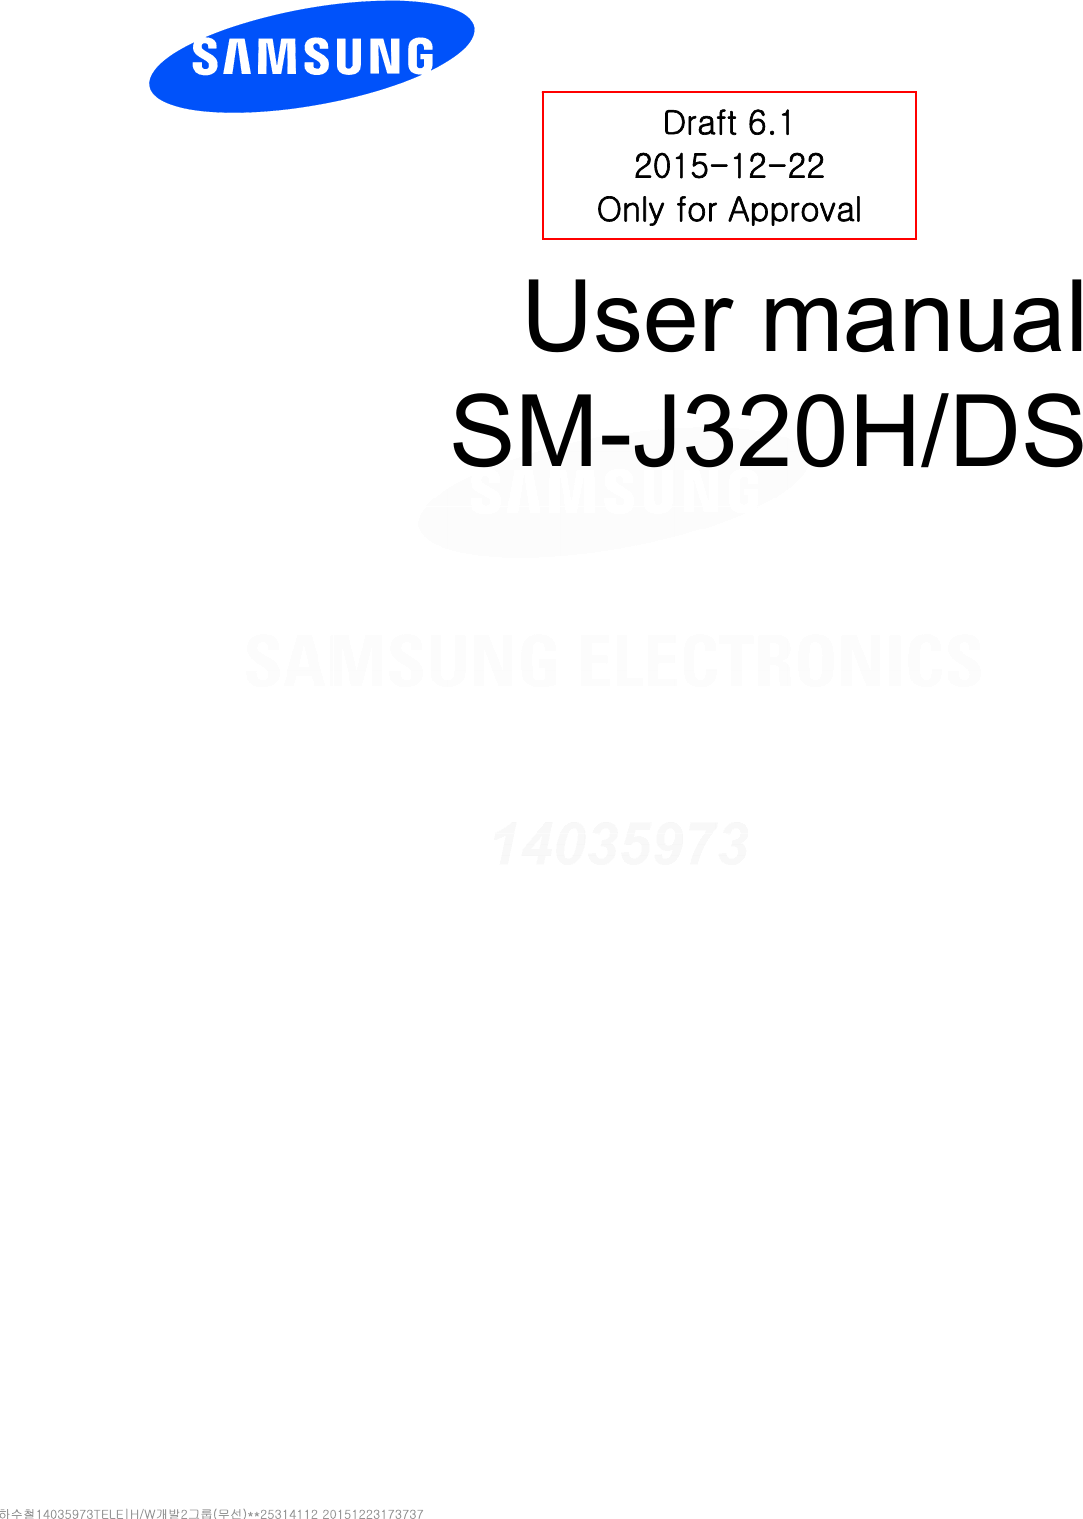           User manual SM-J320H/DS        Draft 6.1 2015-12-22 Only for Approval 